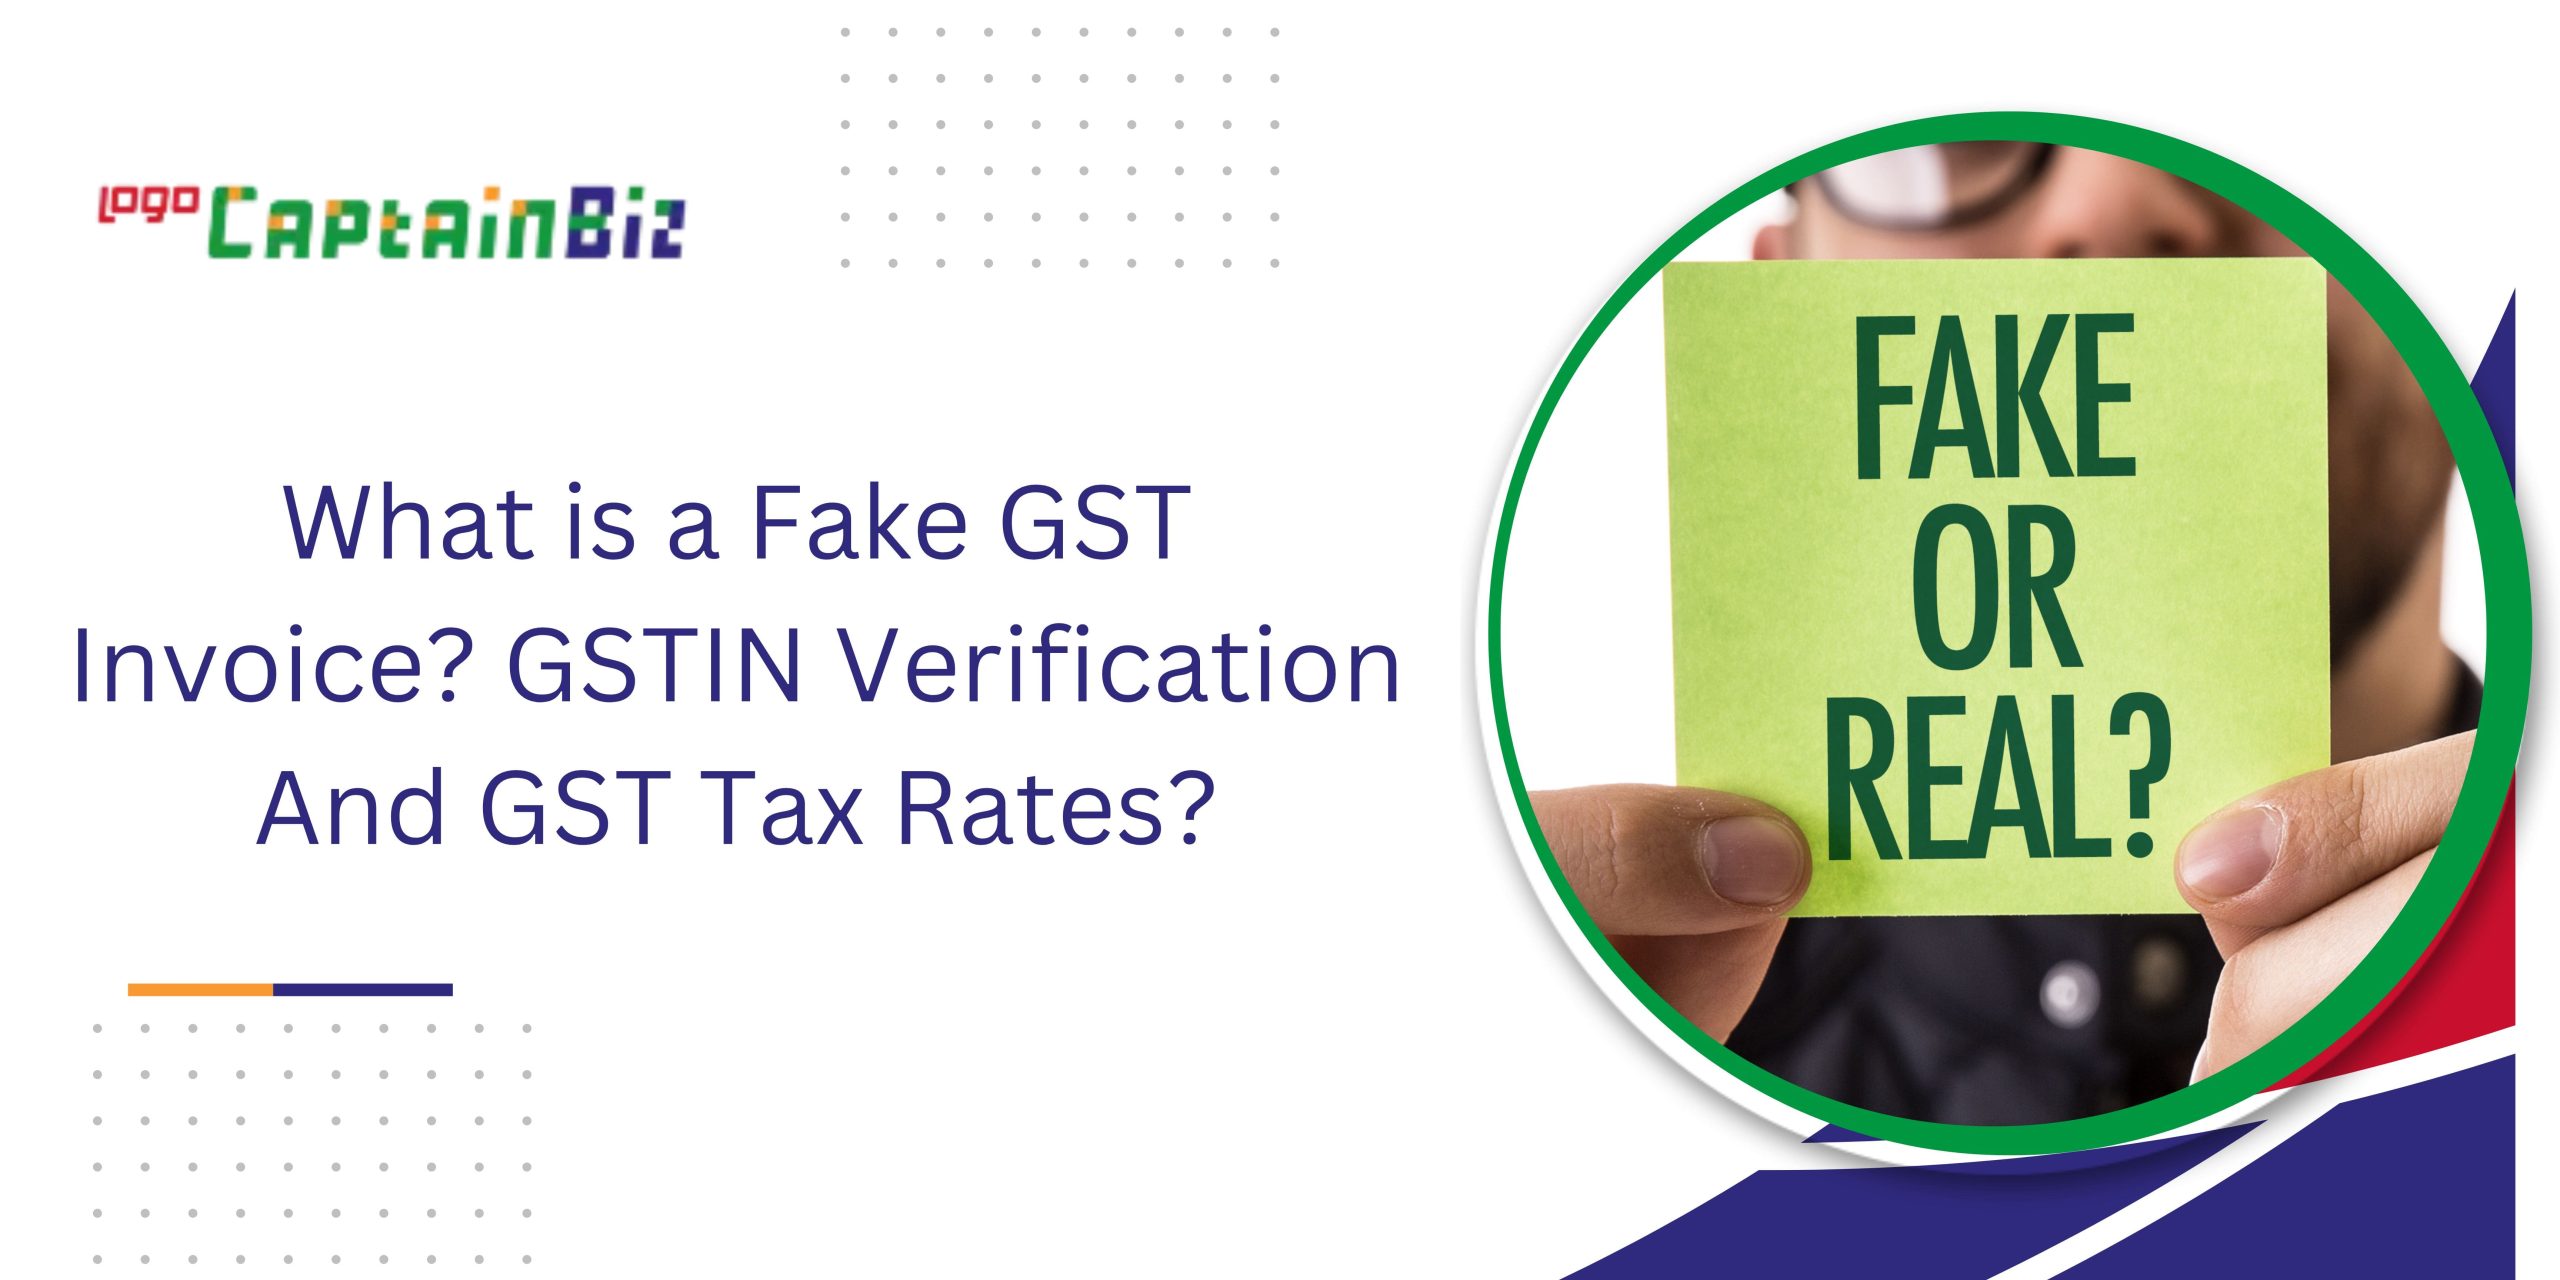 What is a Fake GST Invoice? GSTIN Verification And GST Tax Rates?